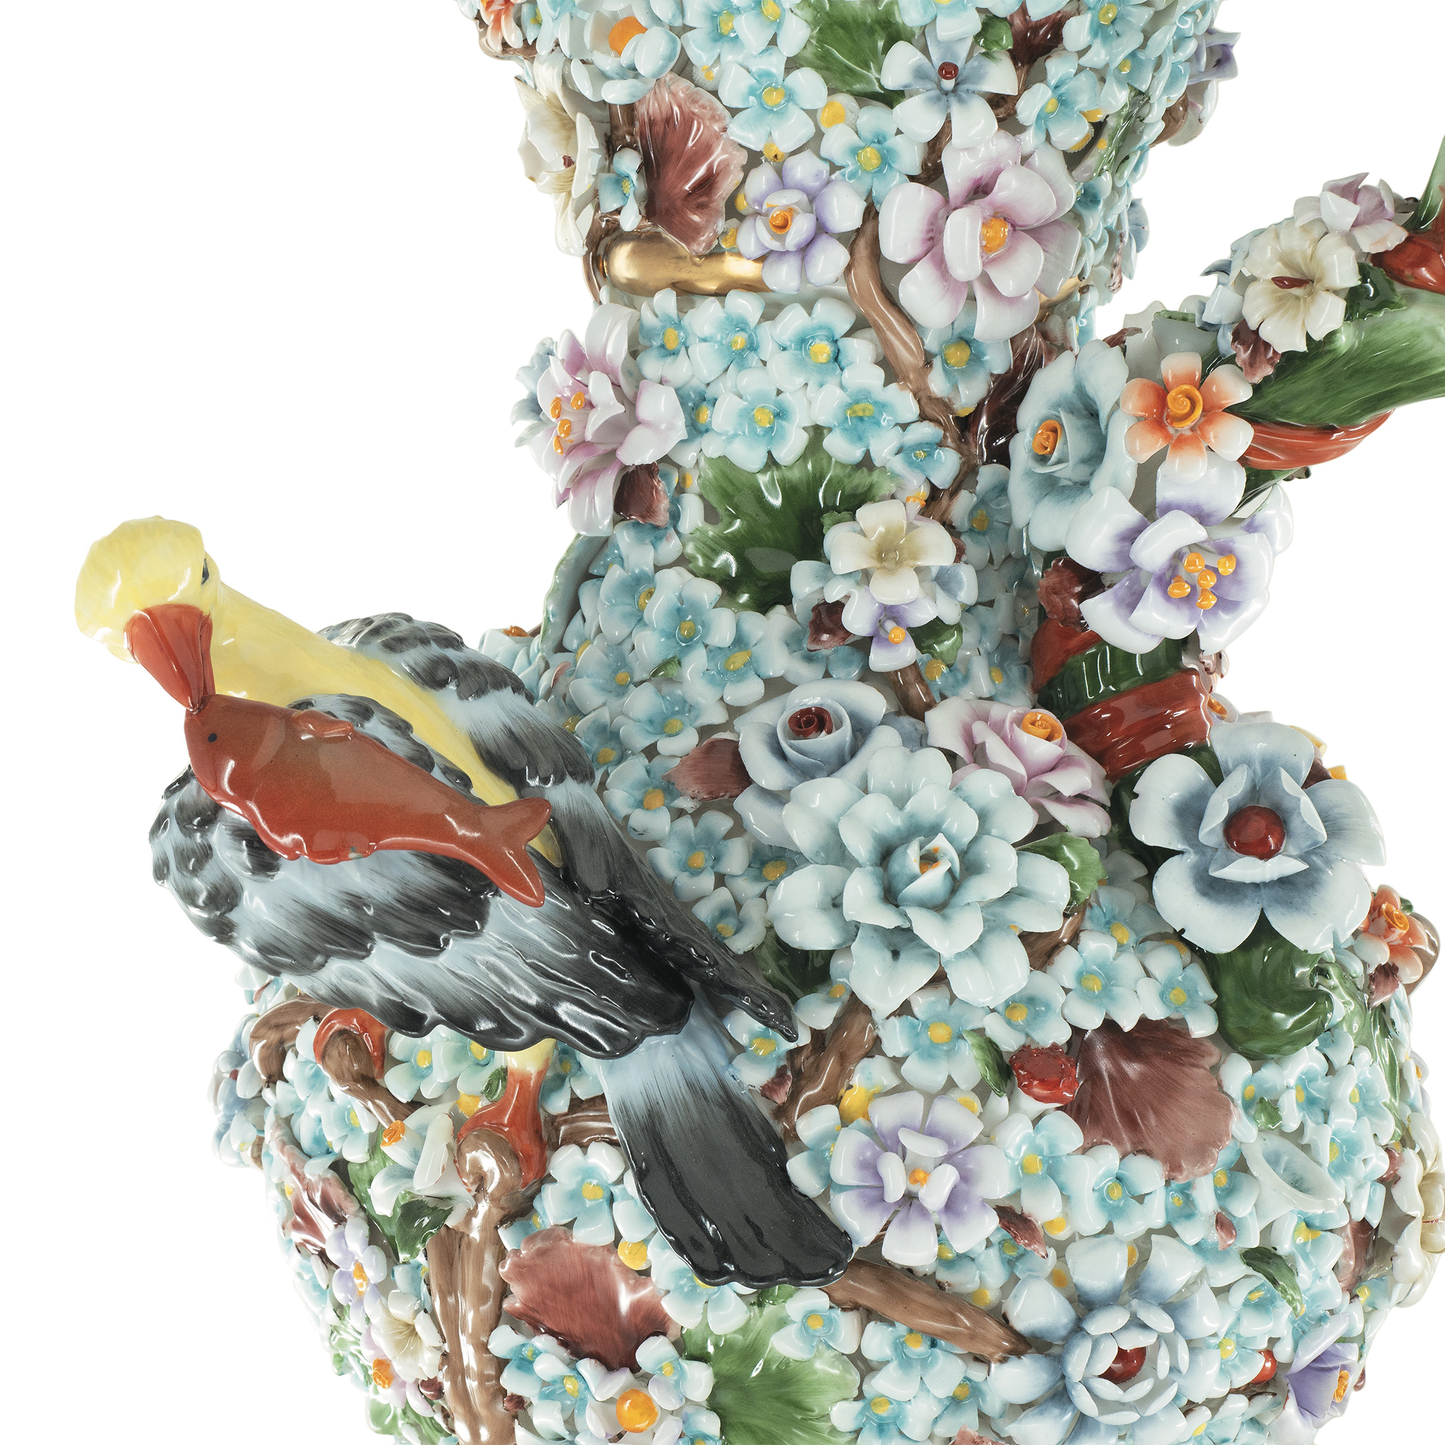 Porcelain Hand-painted Flower Three Dimensional Pitcher Vase with Birds